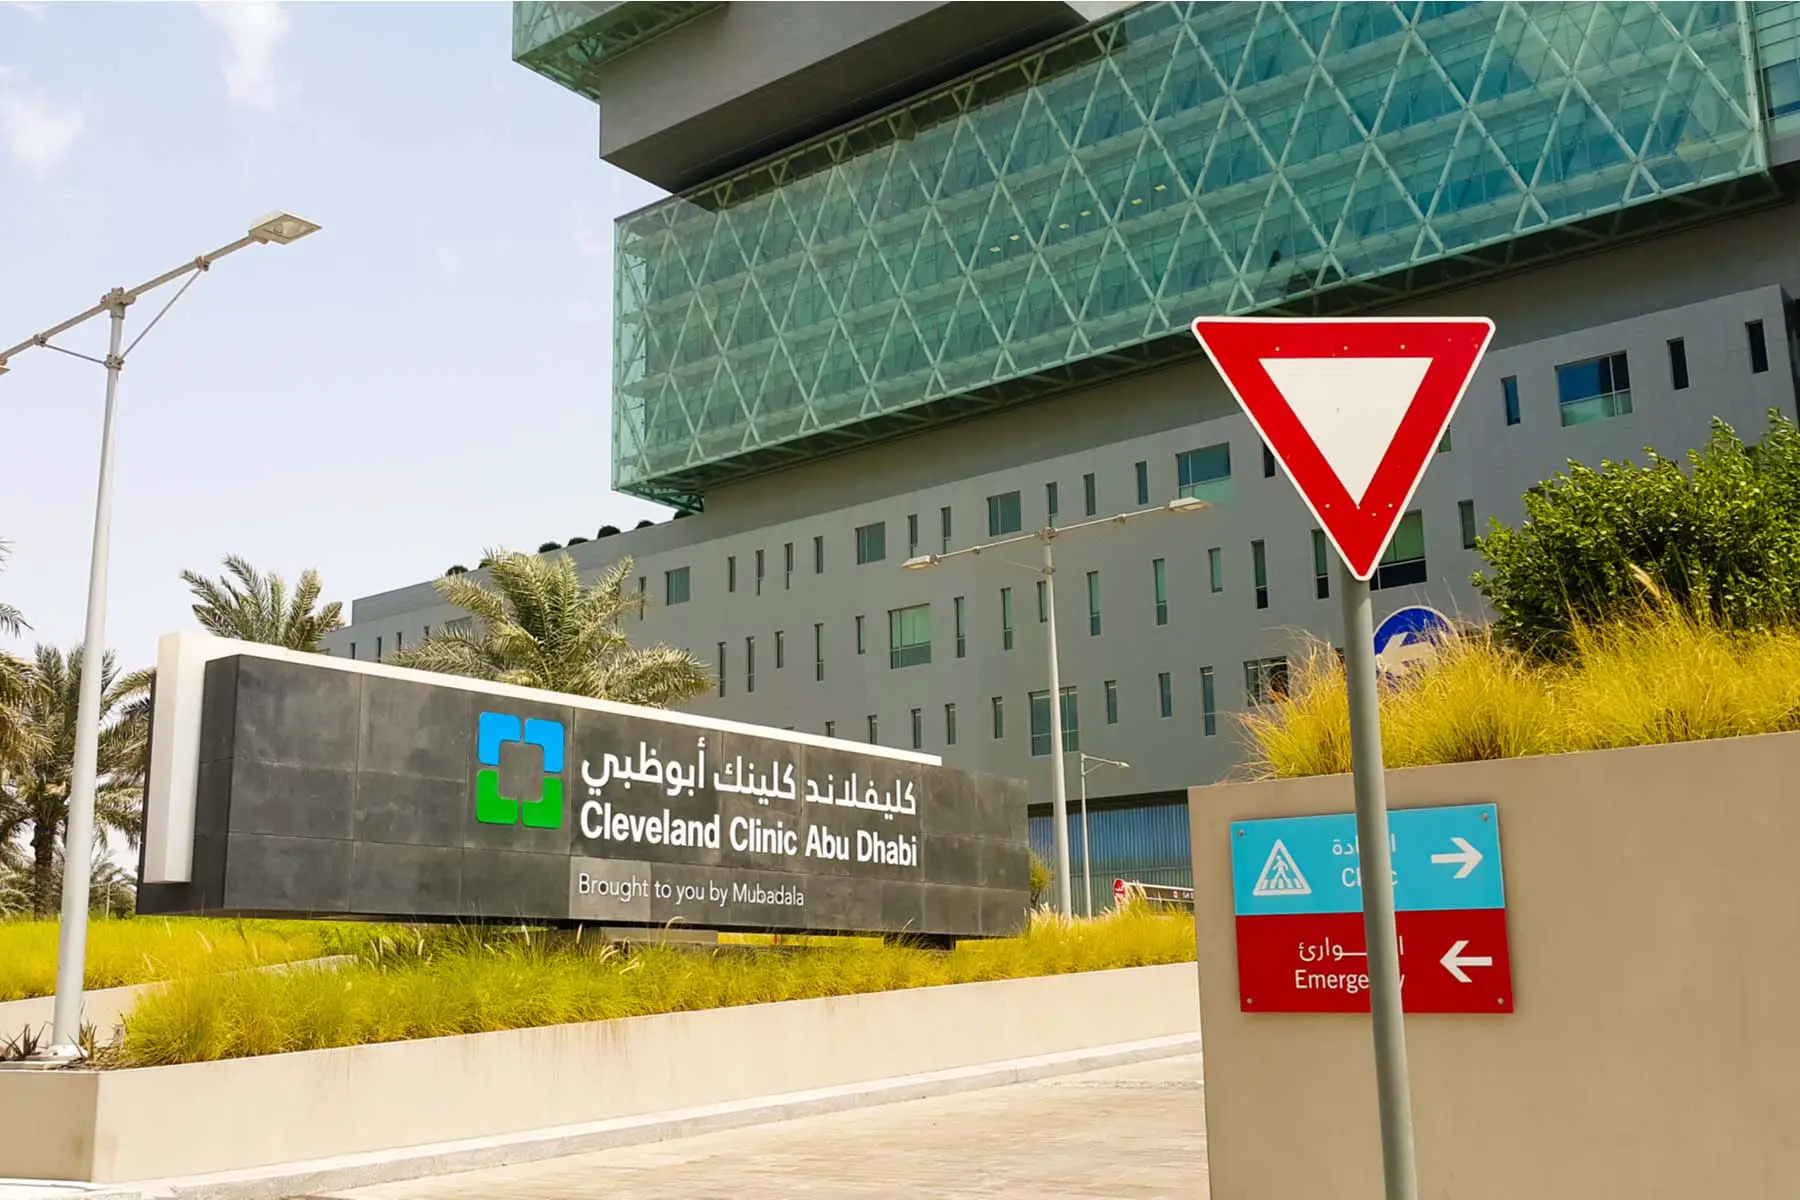 outside of the Cleveland Clinic in Abu Dhabi